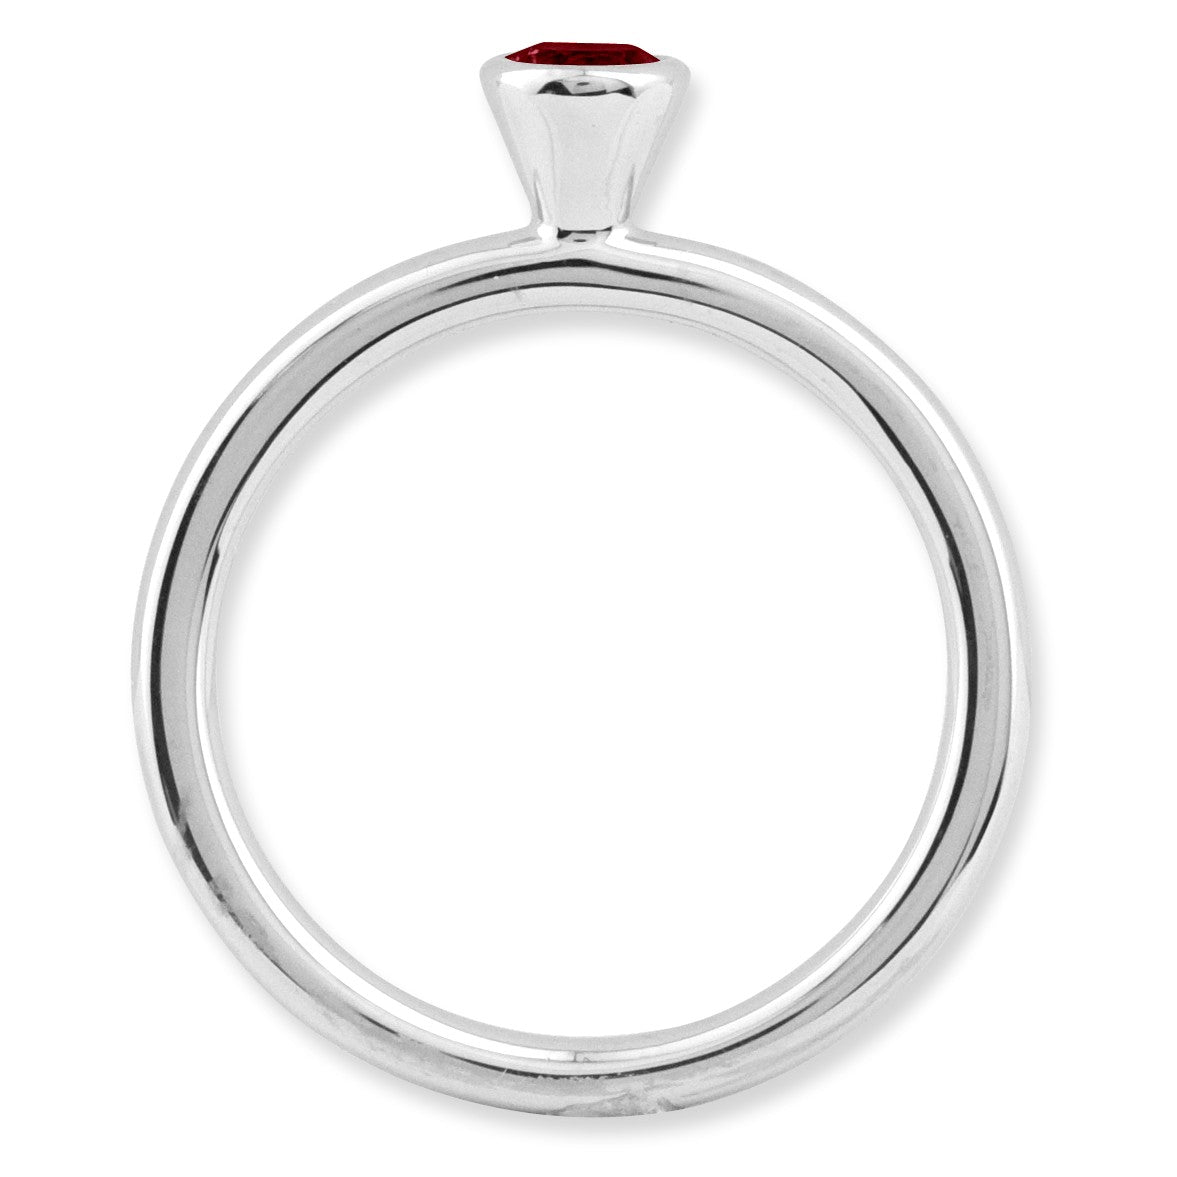 Alternate view of the Sterling Silver &amp; Garnet Stackable High Profile 4mm Solitaire Ring by The Black Bow Jewelry Co.